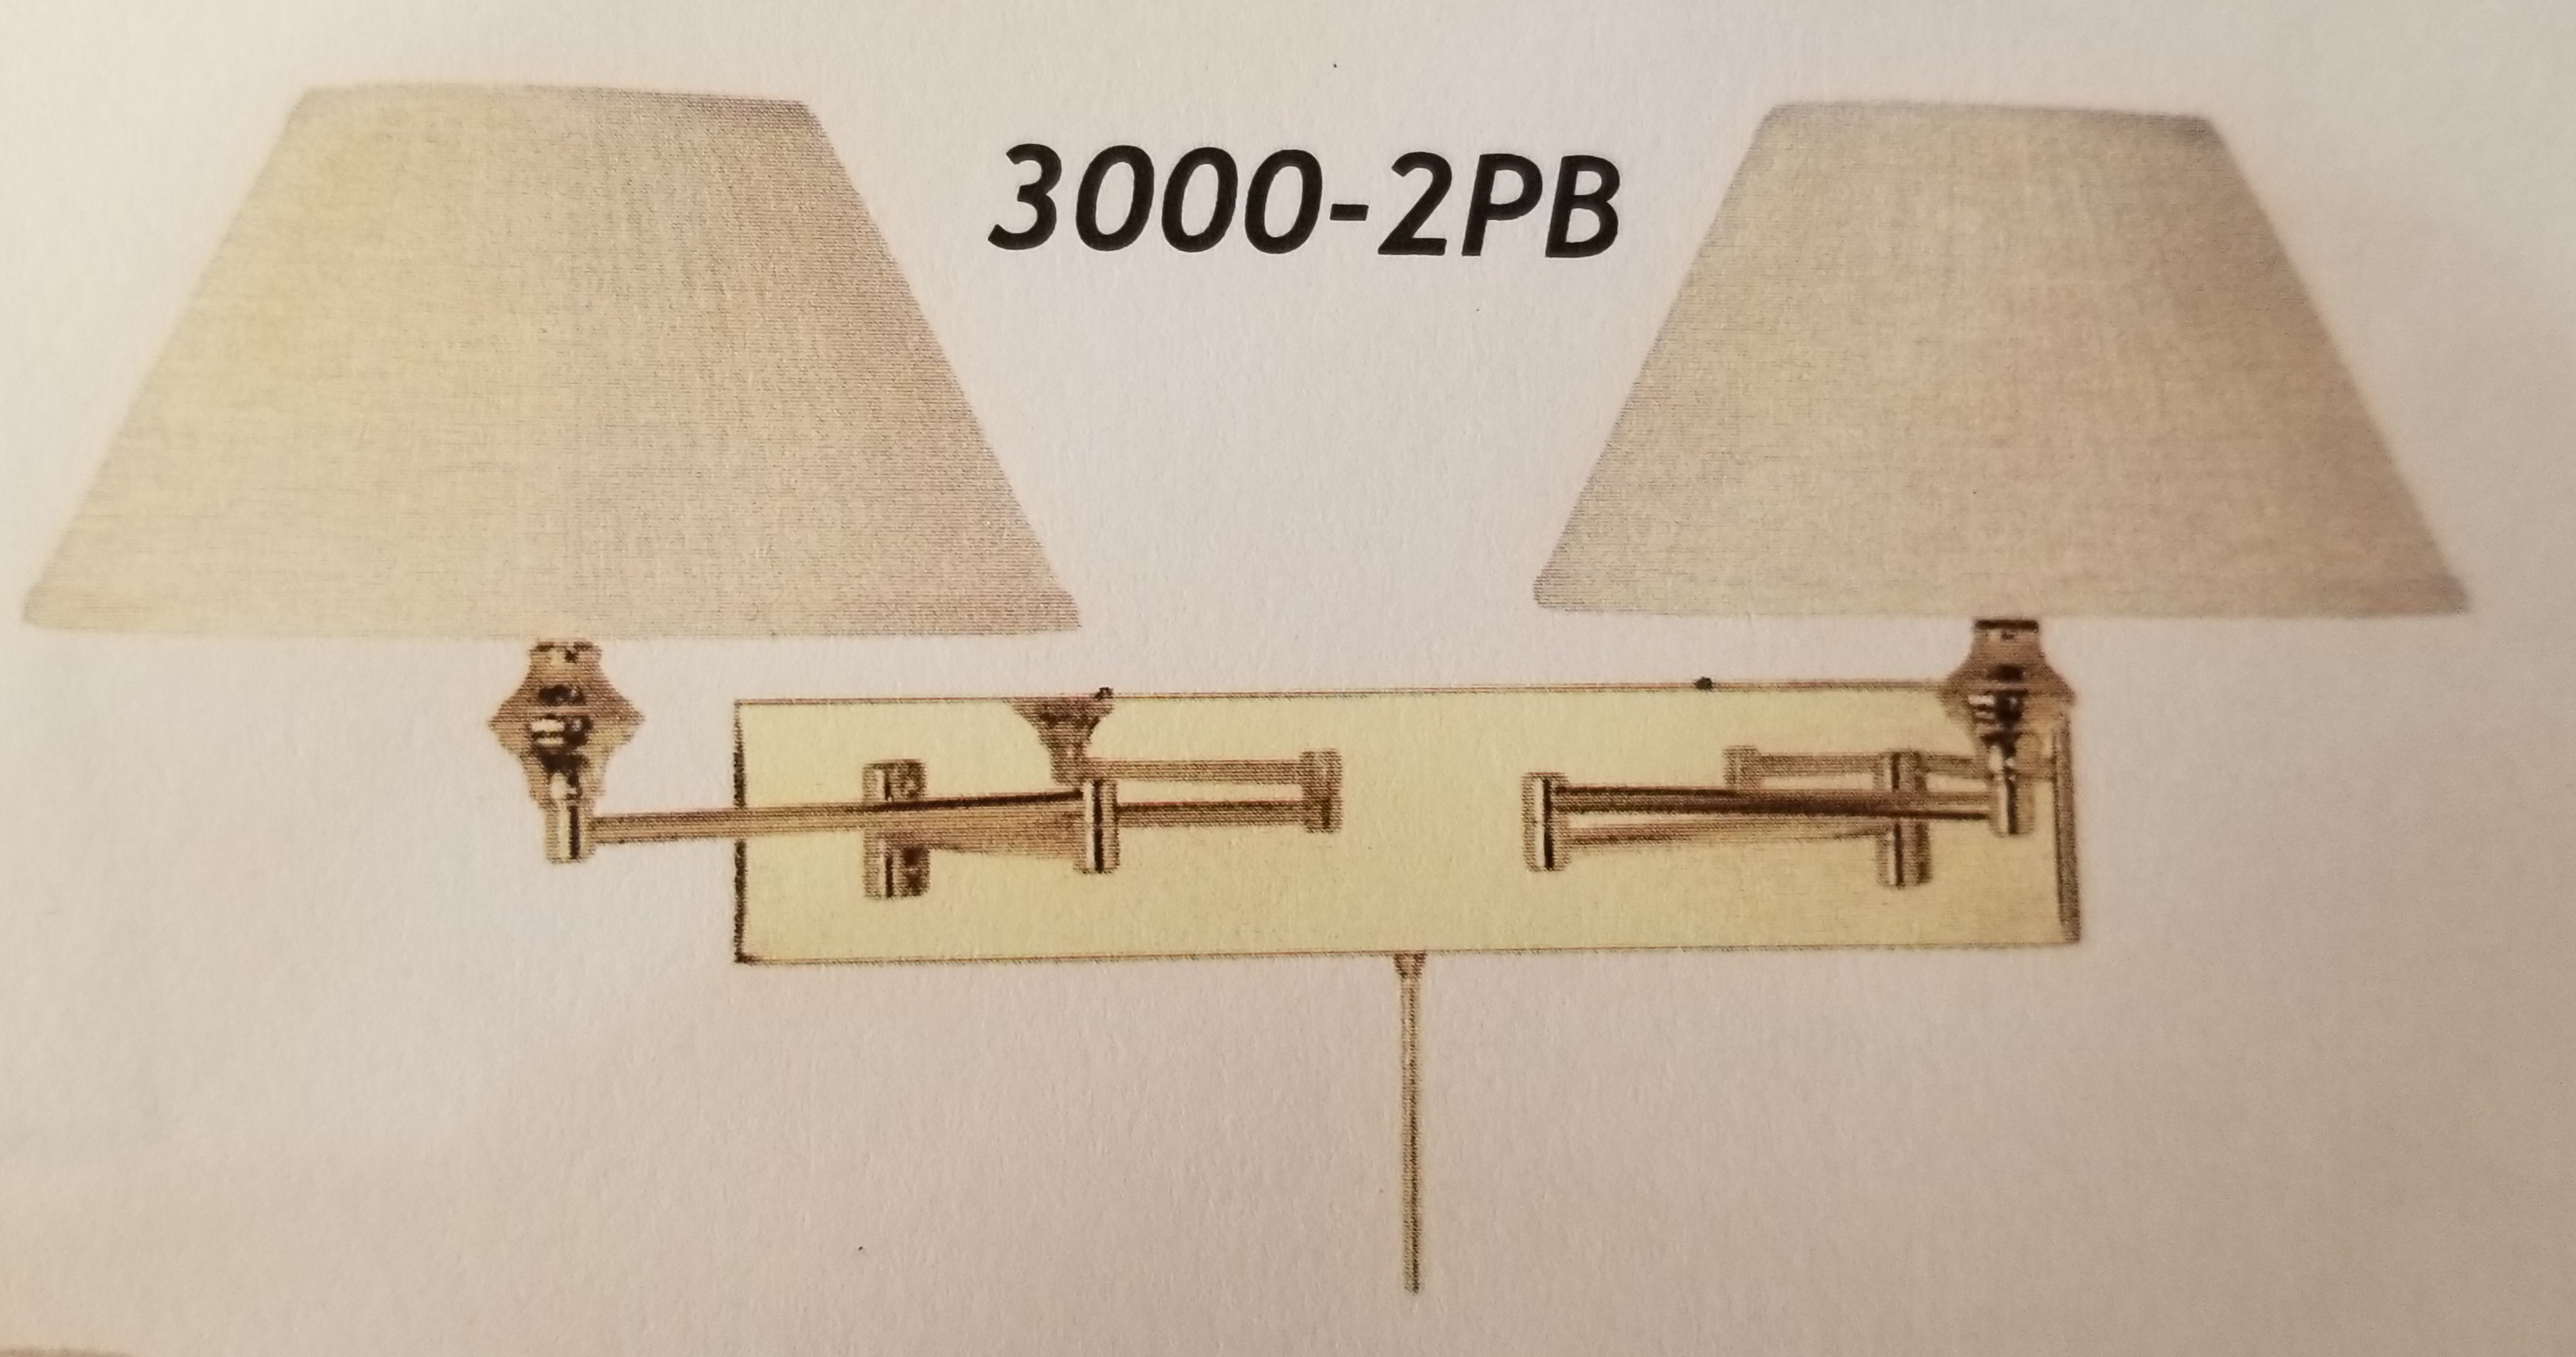 3000-2 Swing Arm Wall Right
Made in Canada
Available in Antique Brass
Brushed Chrome or Black
Regular Price $312.99
Blowout Price $219.99